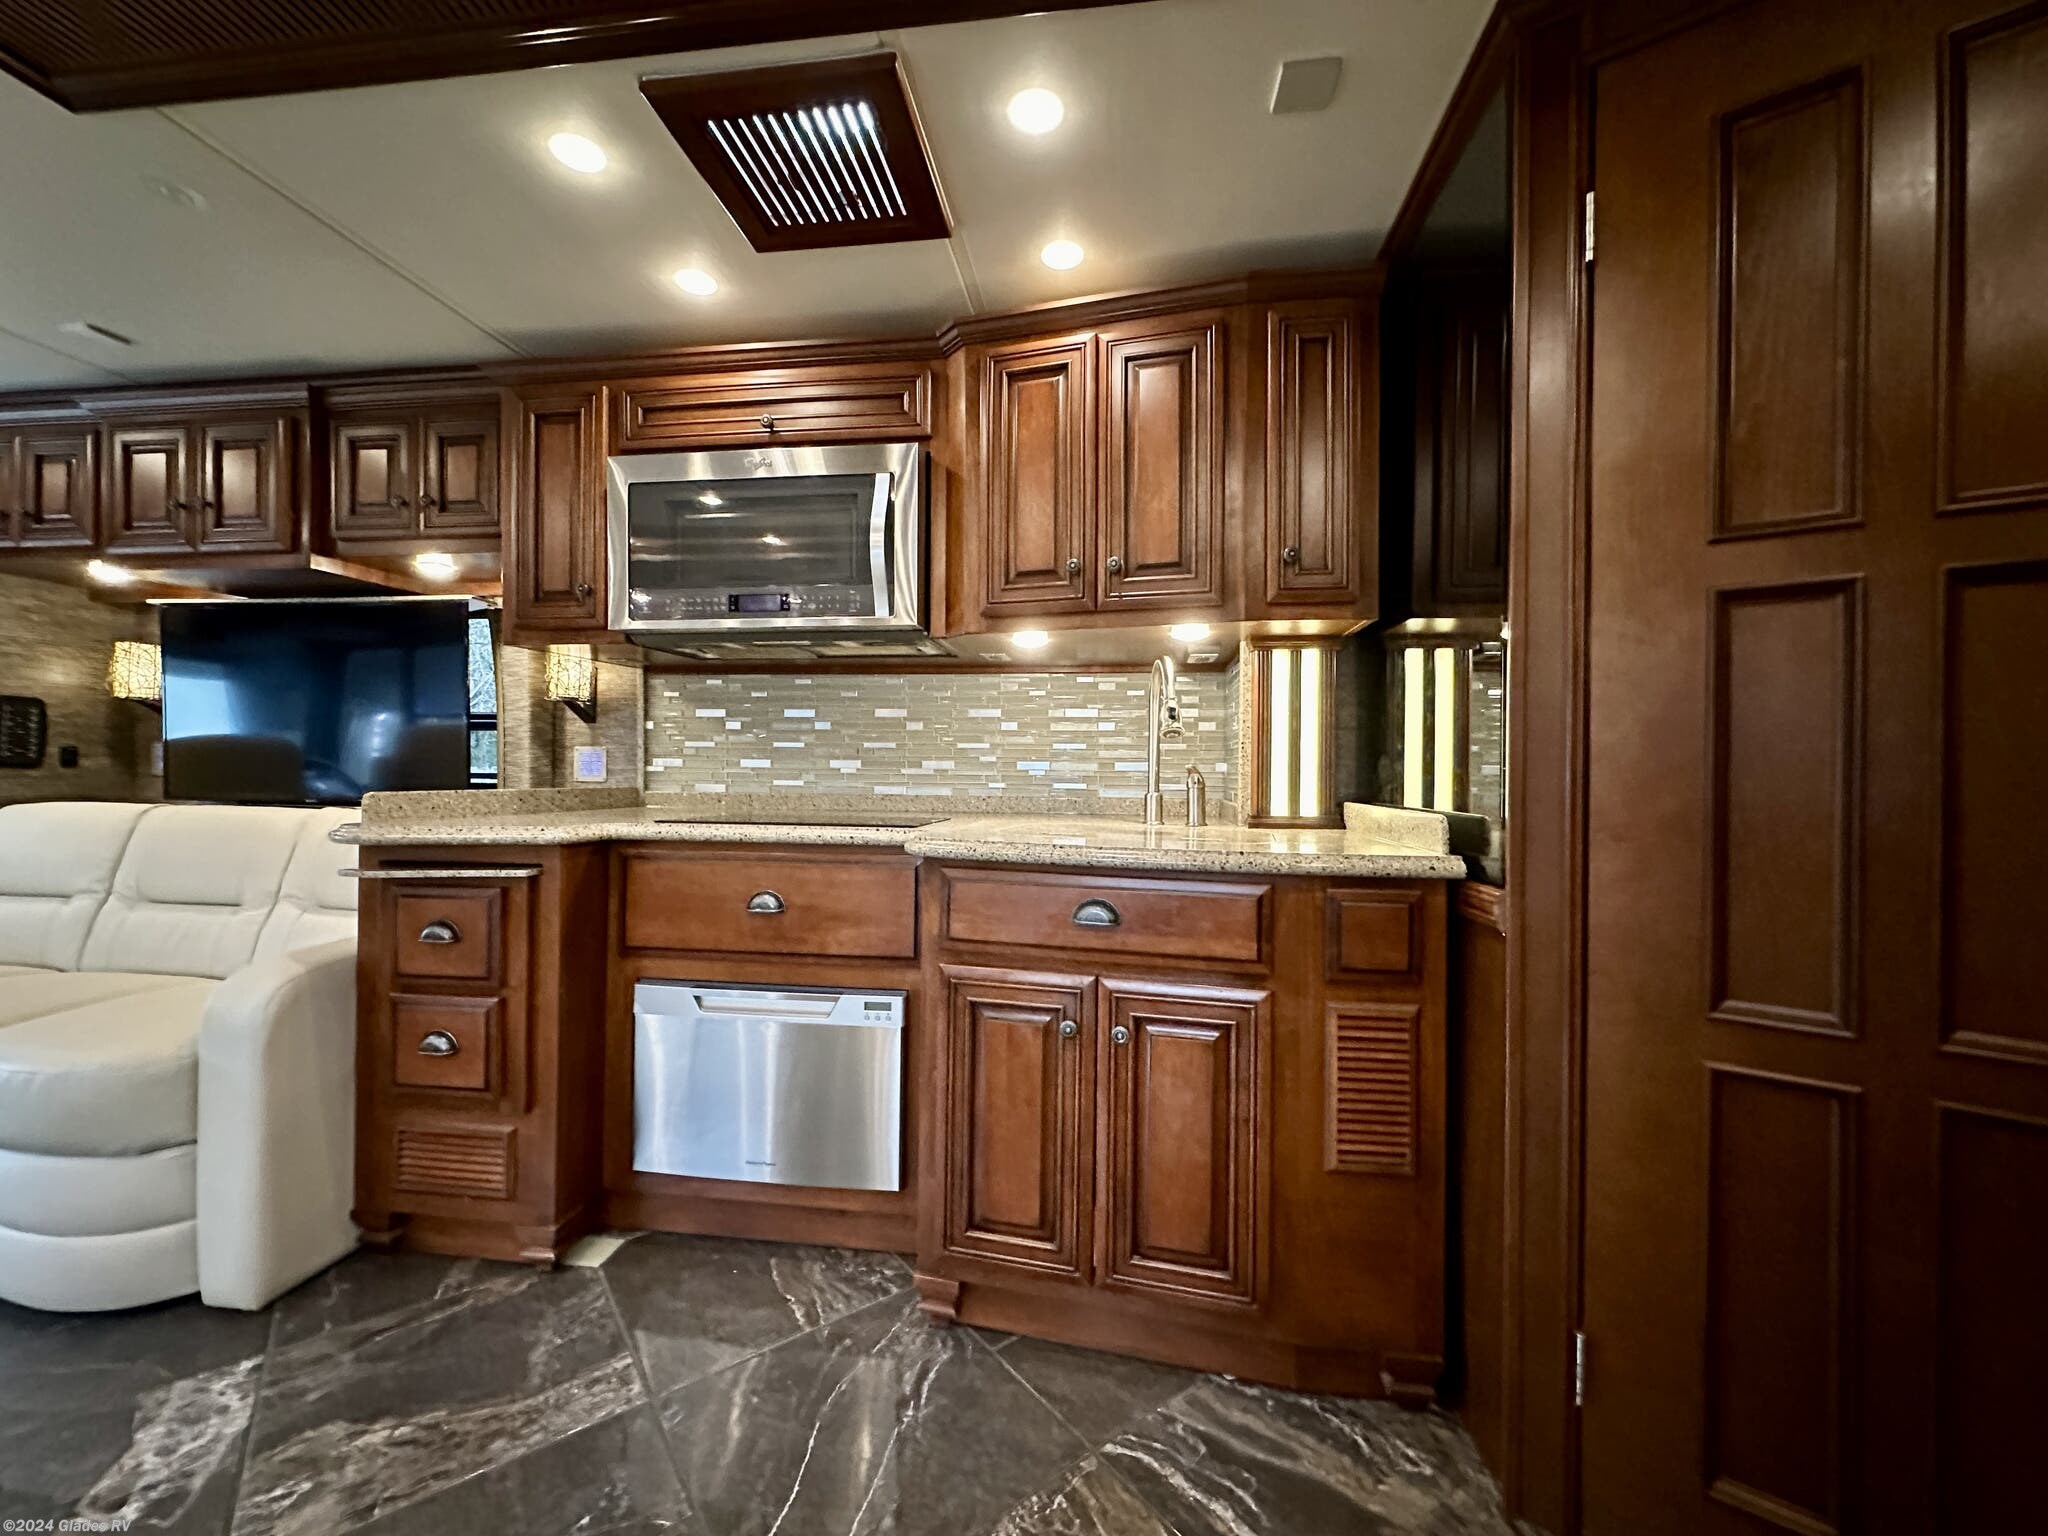 2015 Newmar Dutch Star 4018 RV for Sale in Fort Myers, FL 33912 | 1341 ...